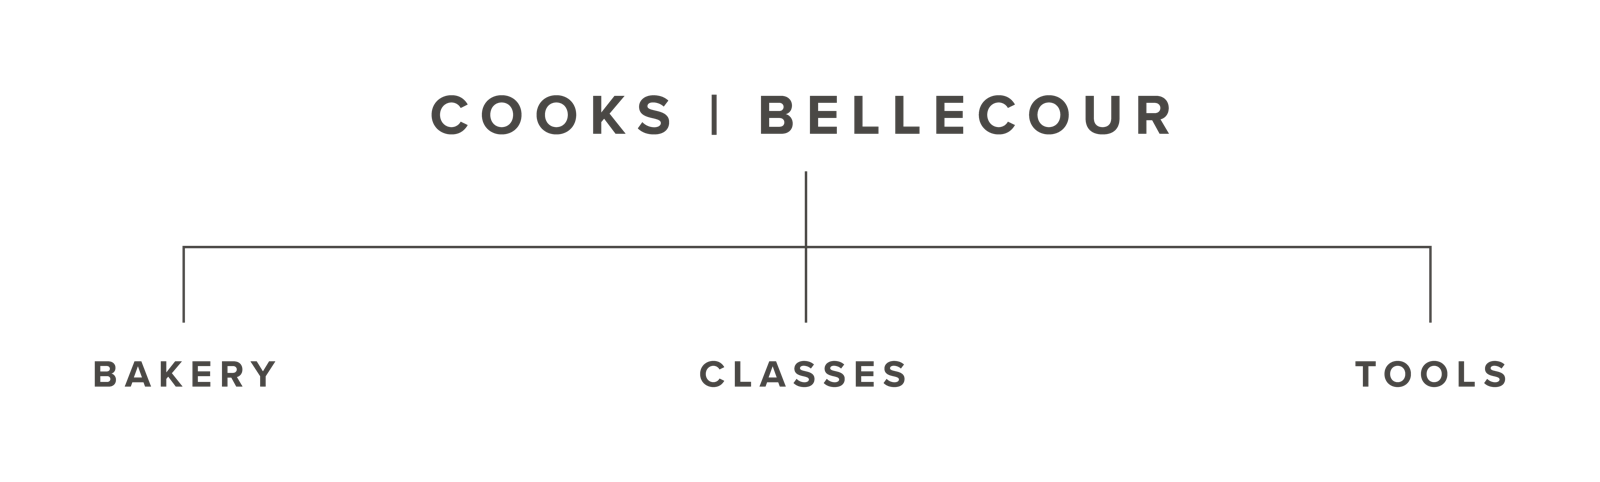 A graphic showing the new Cooks | Bellecour.